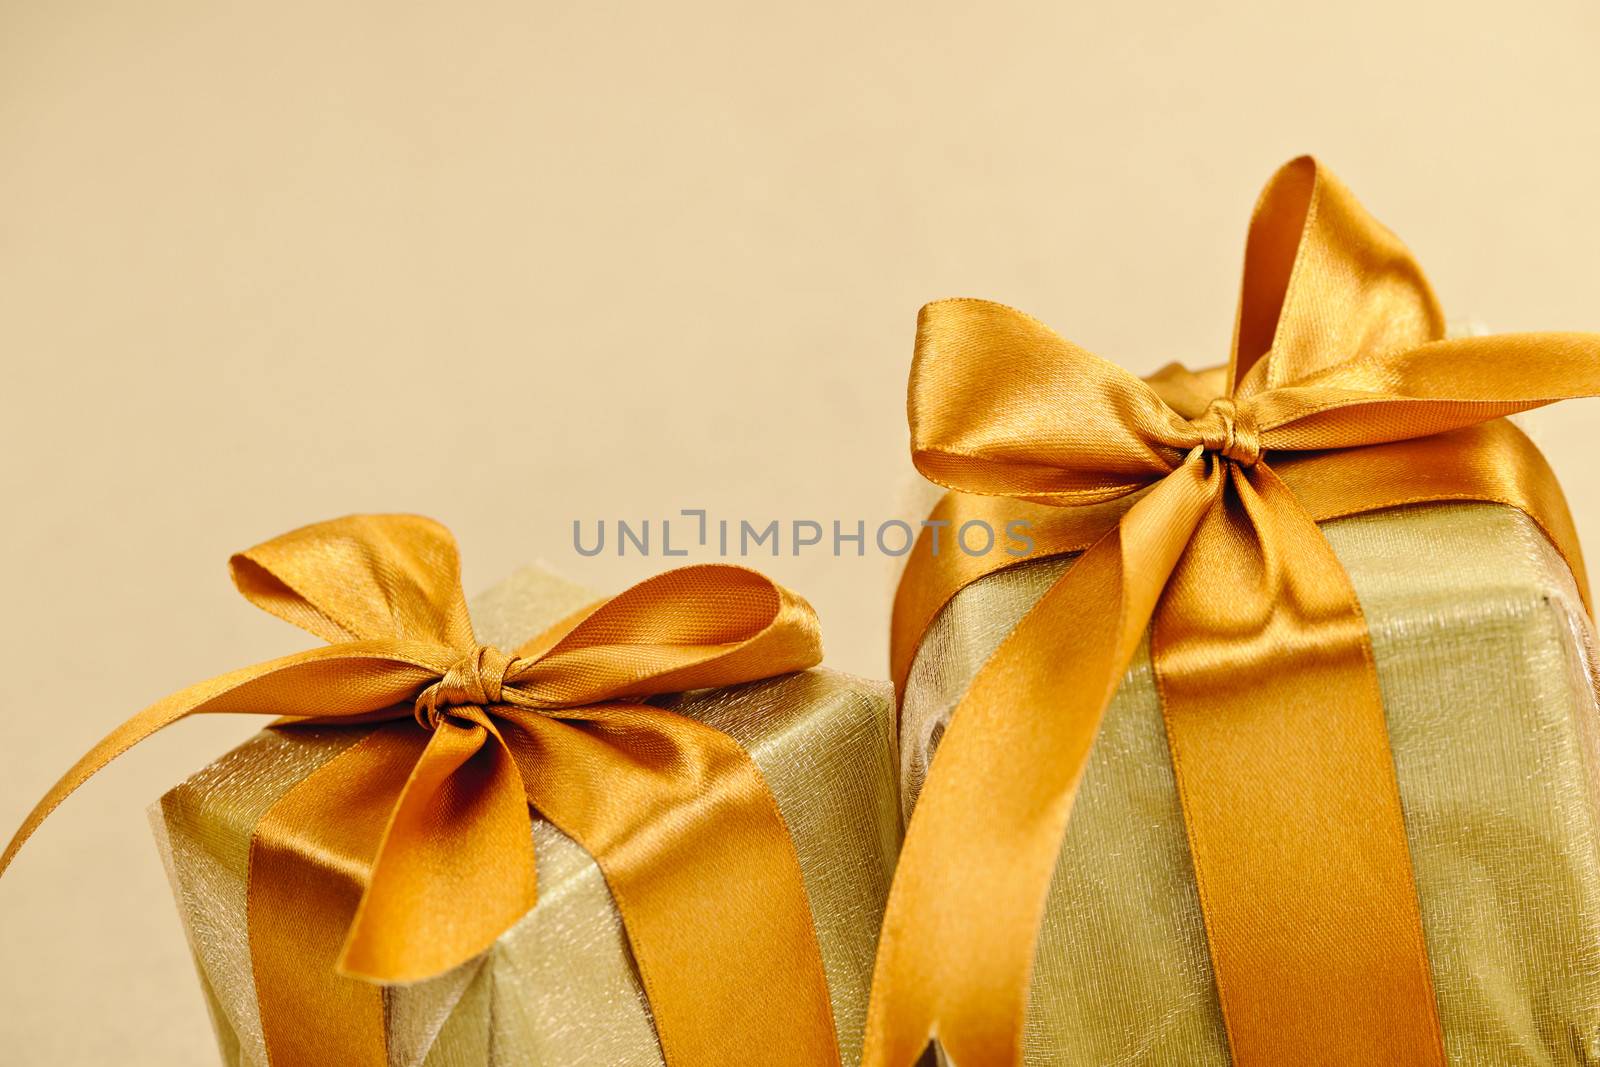 Two golden wrapped gift boxes by elenathewise